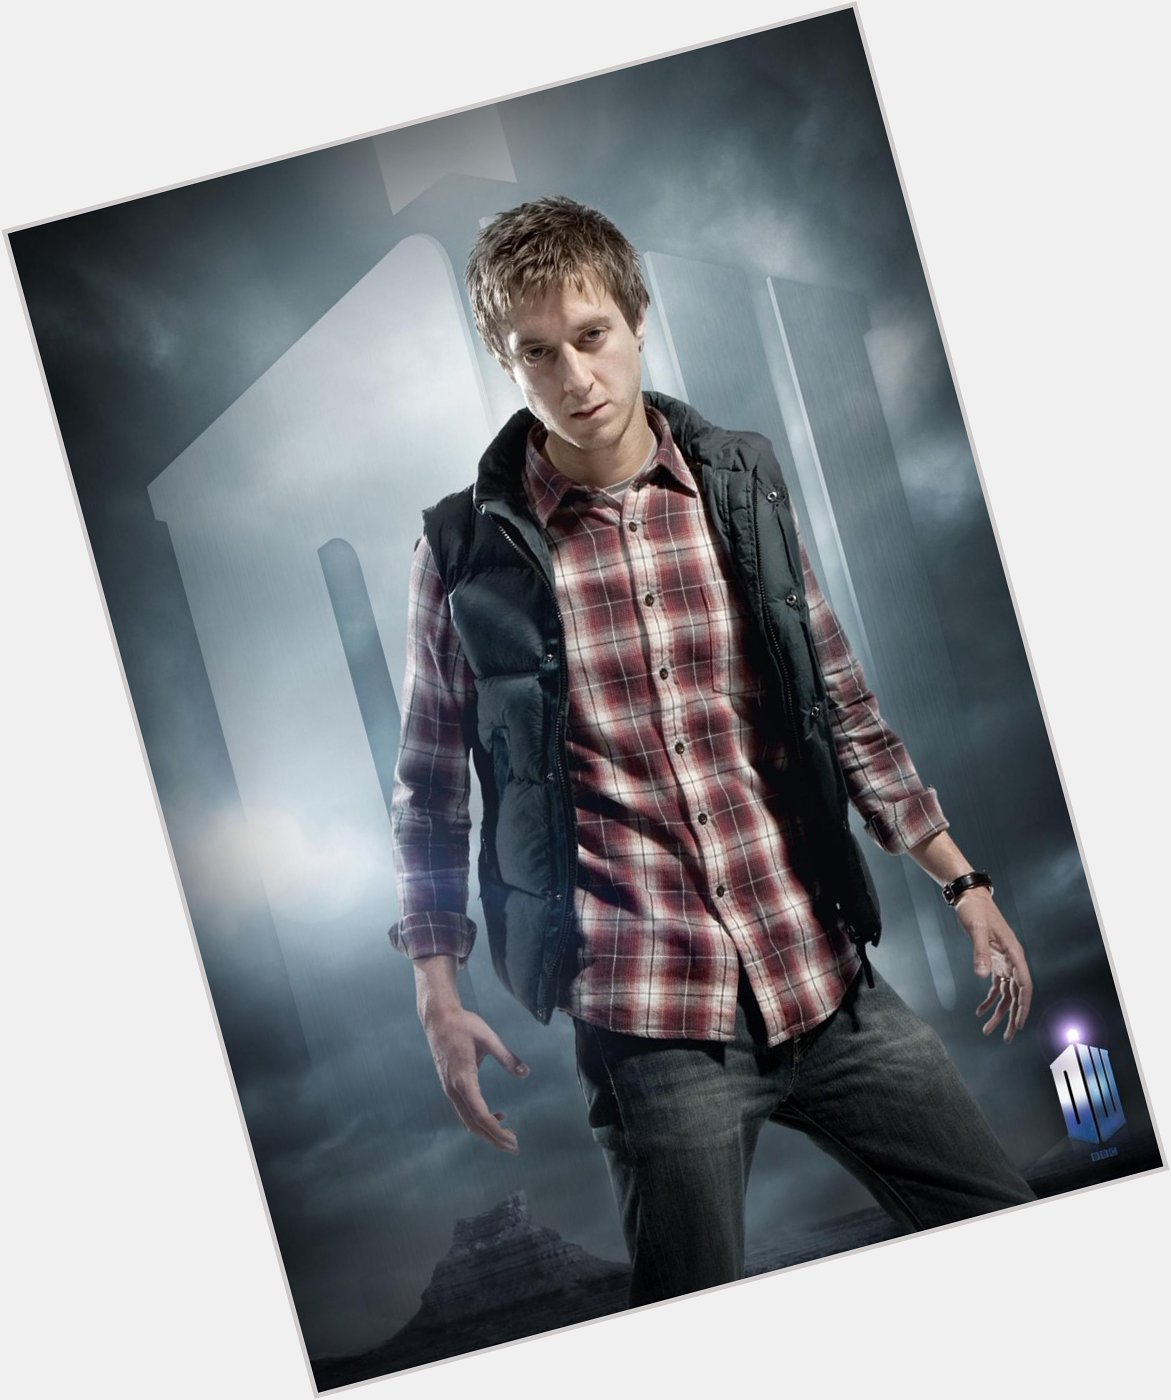 Happy Birthday to Arthur Darvill, who played Rory Williams in 